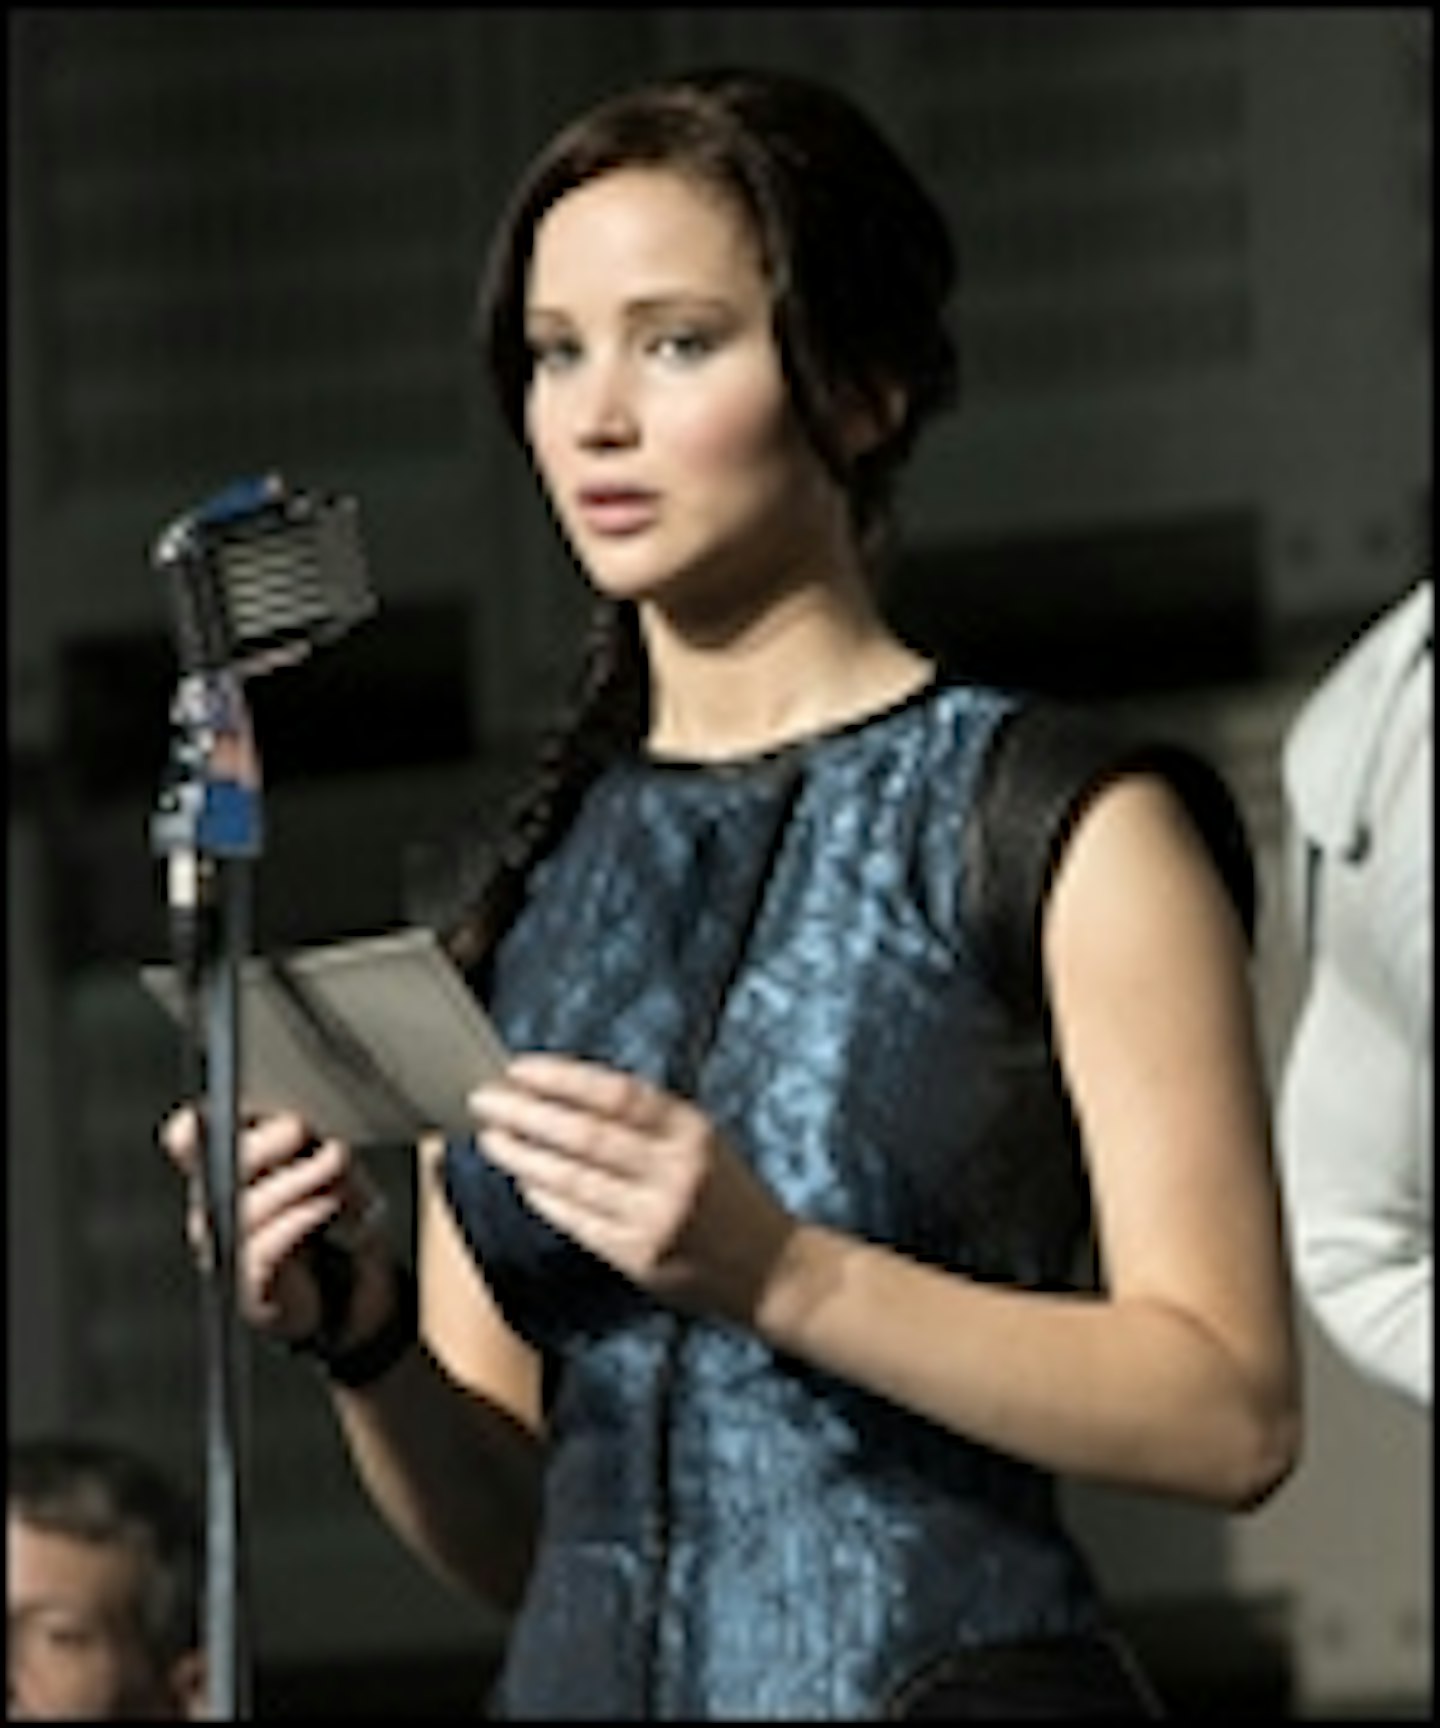 Hunger Games: Catching Fire Trailer 